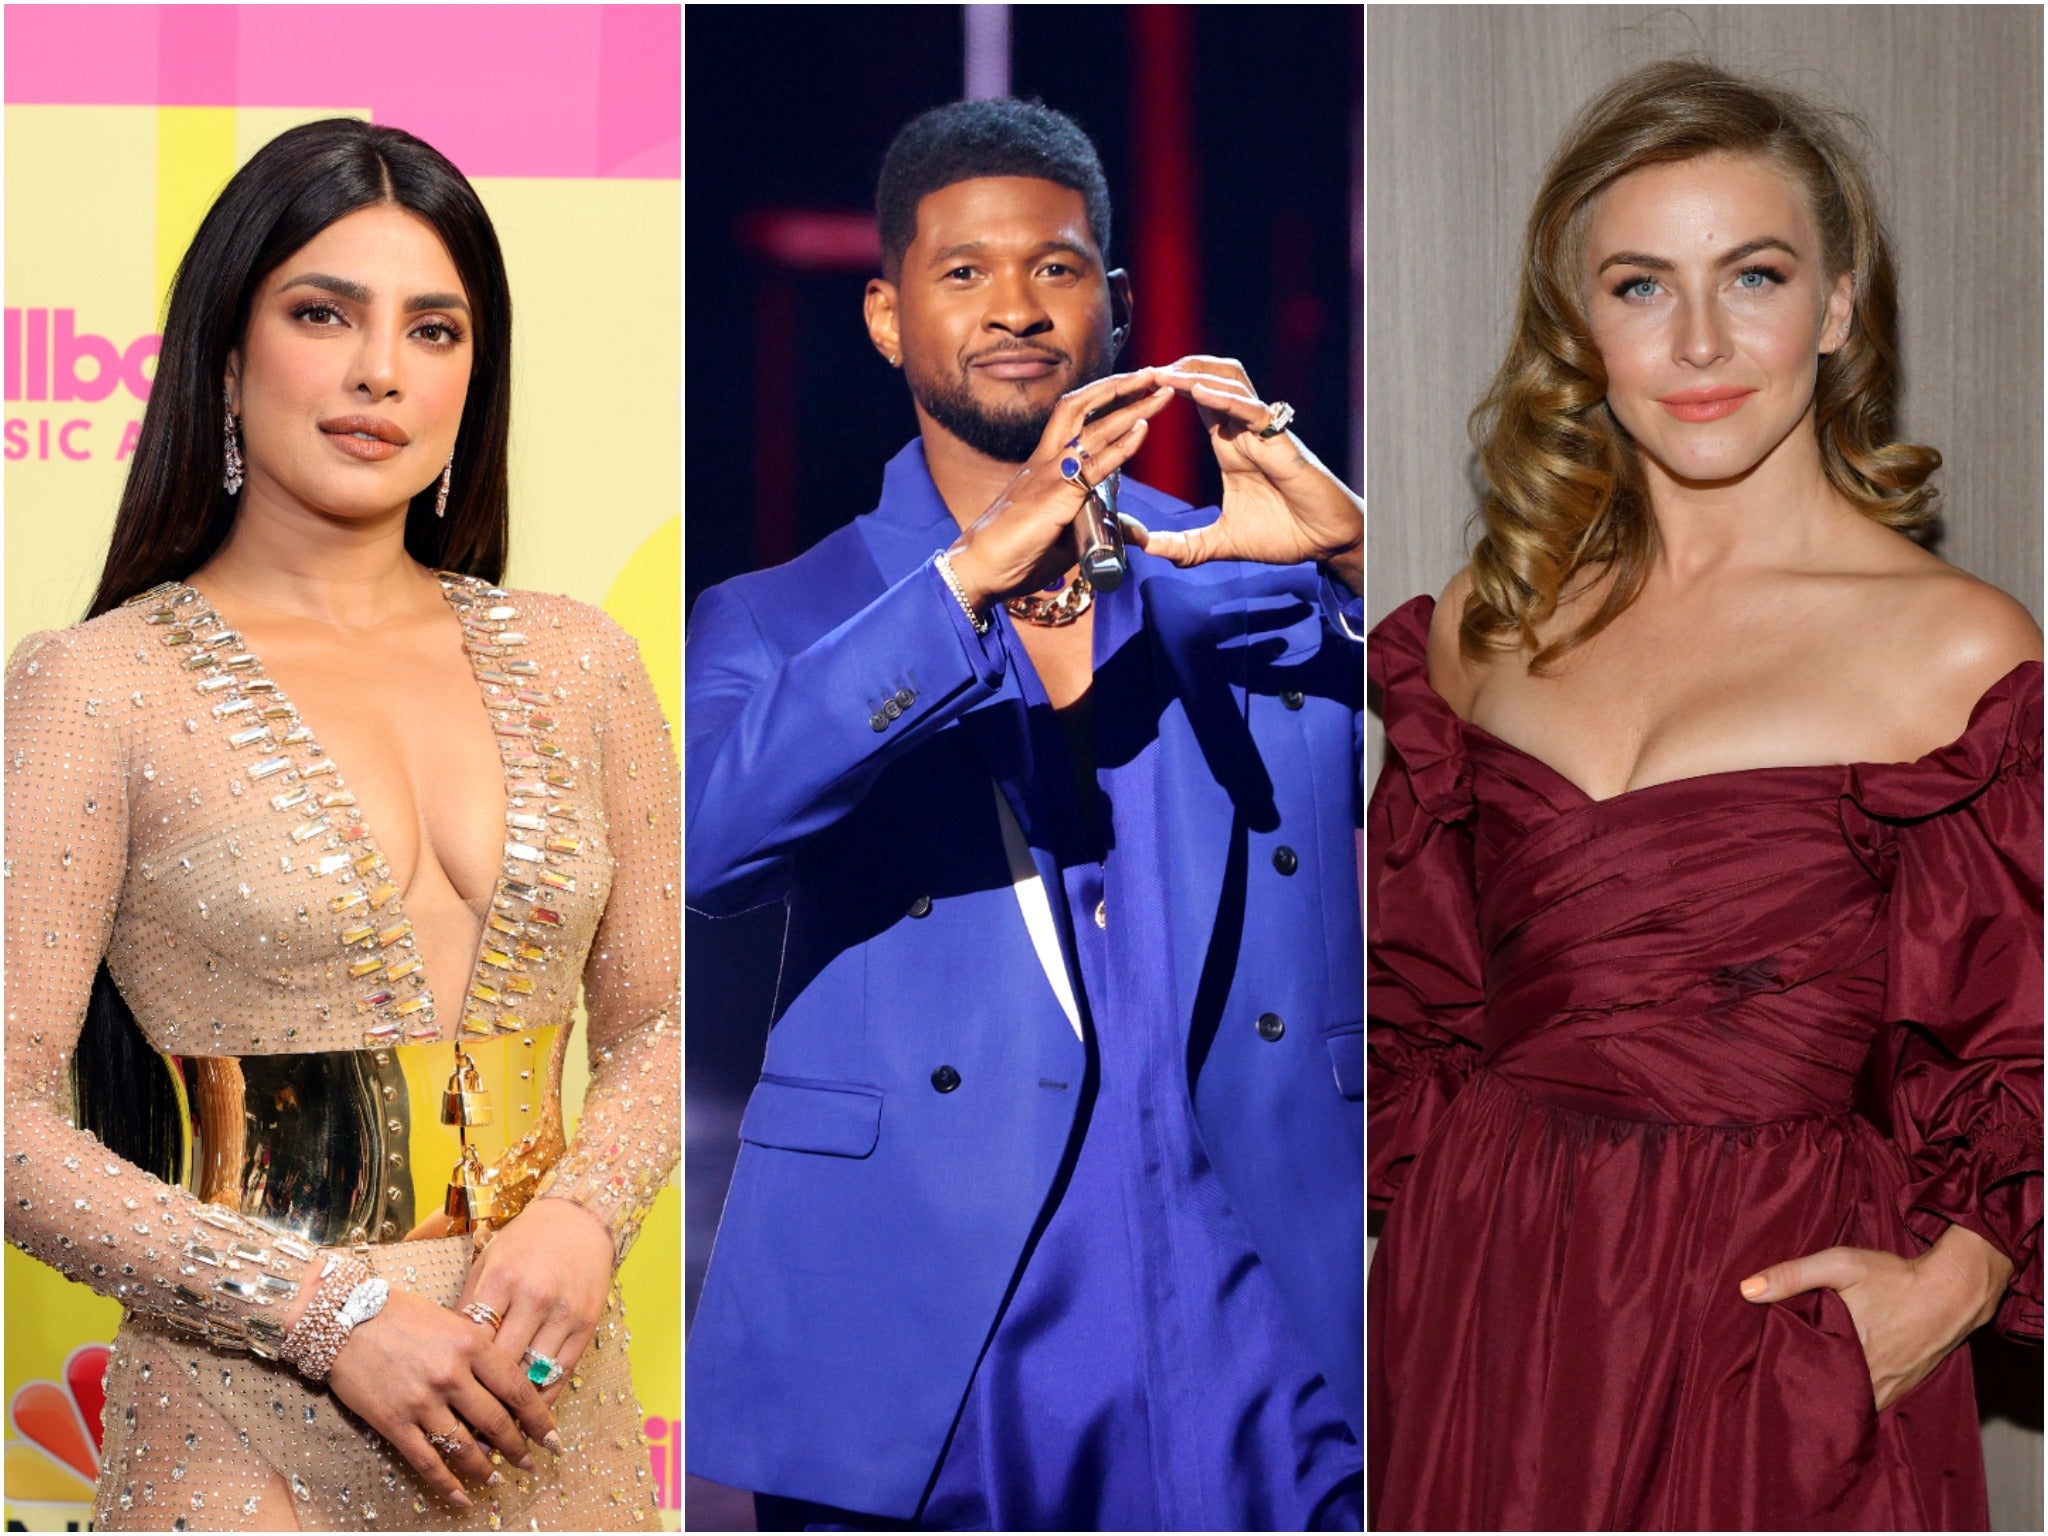 Priyanka Chopra, Usher and Julianne Hough were criticised for hosting competition show for activists